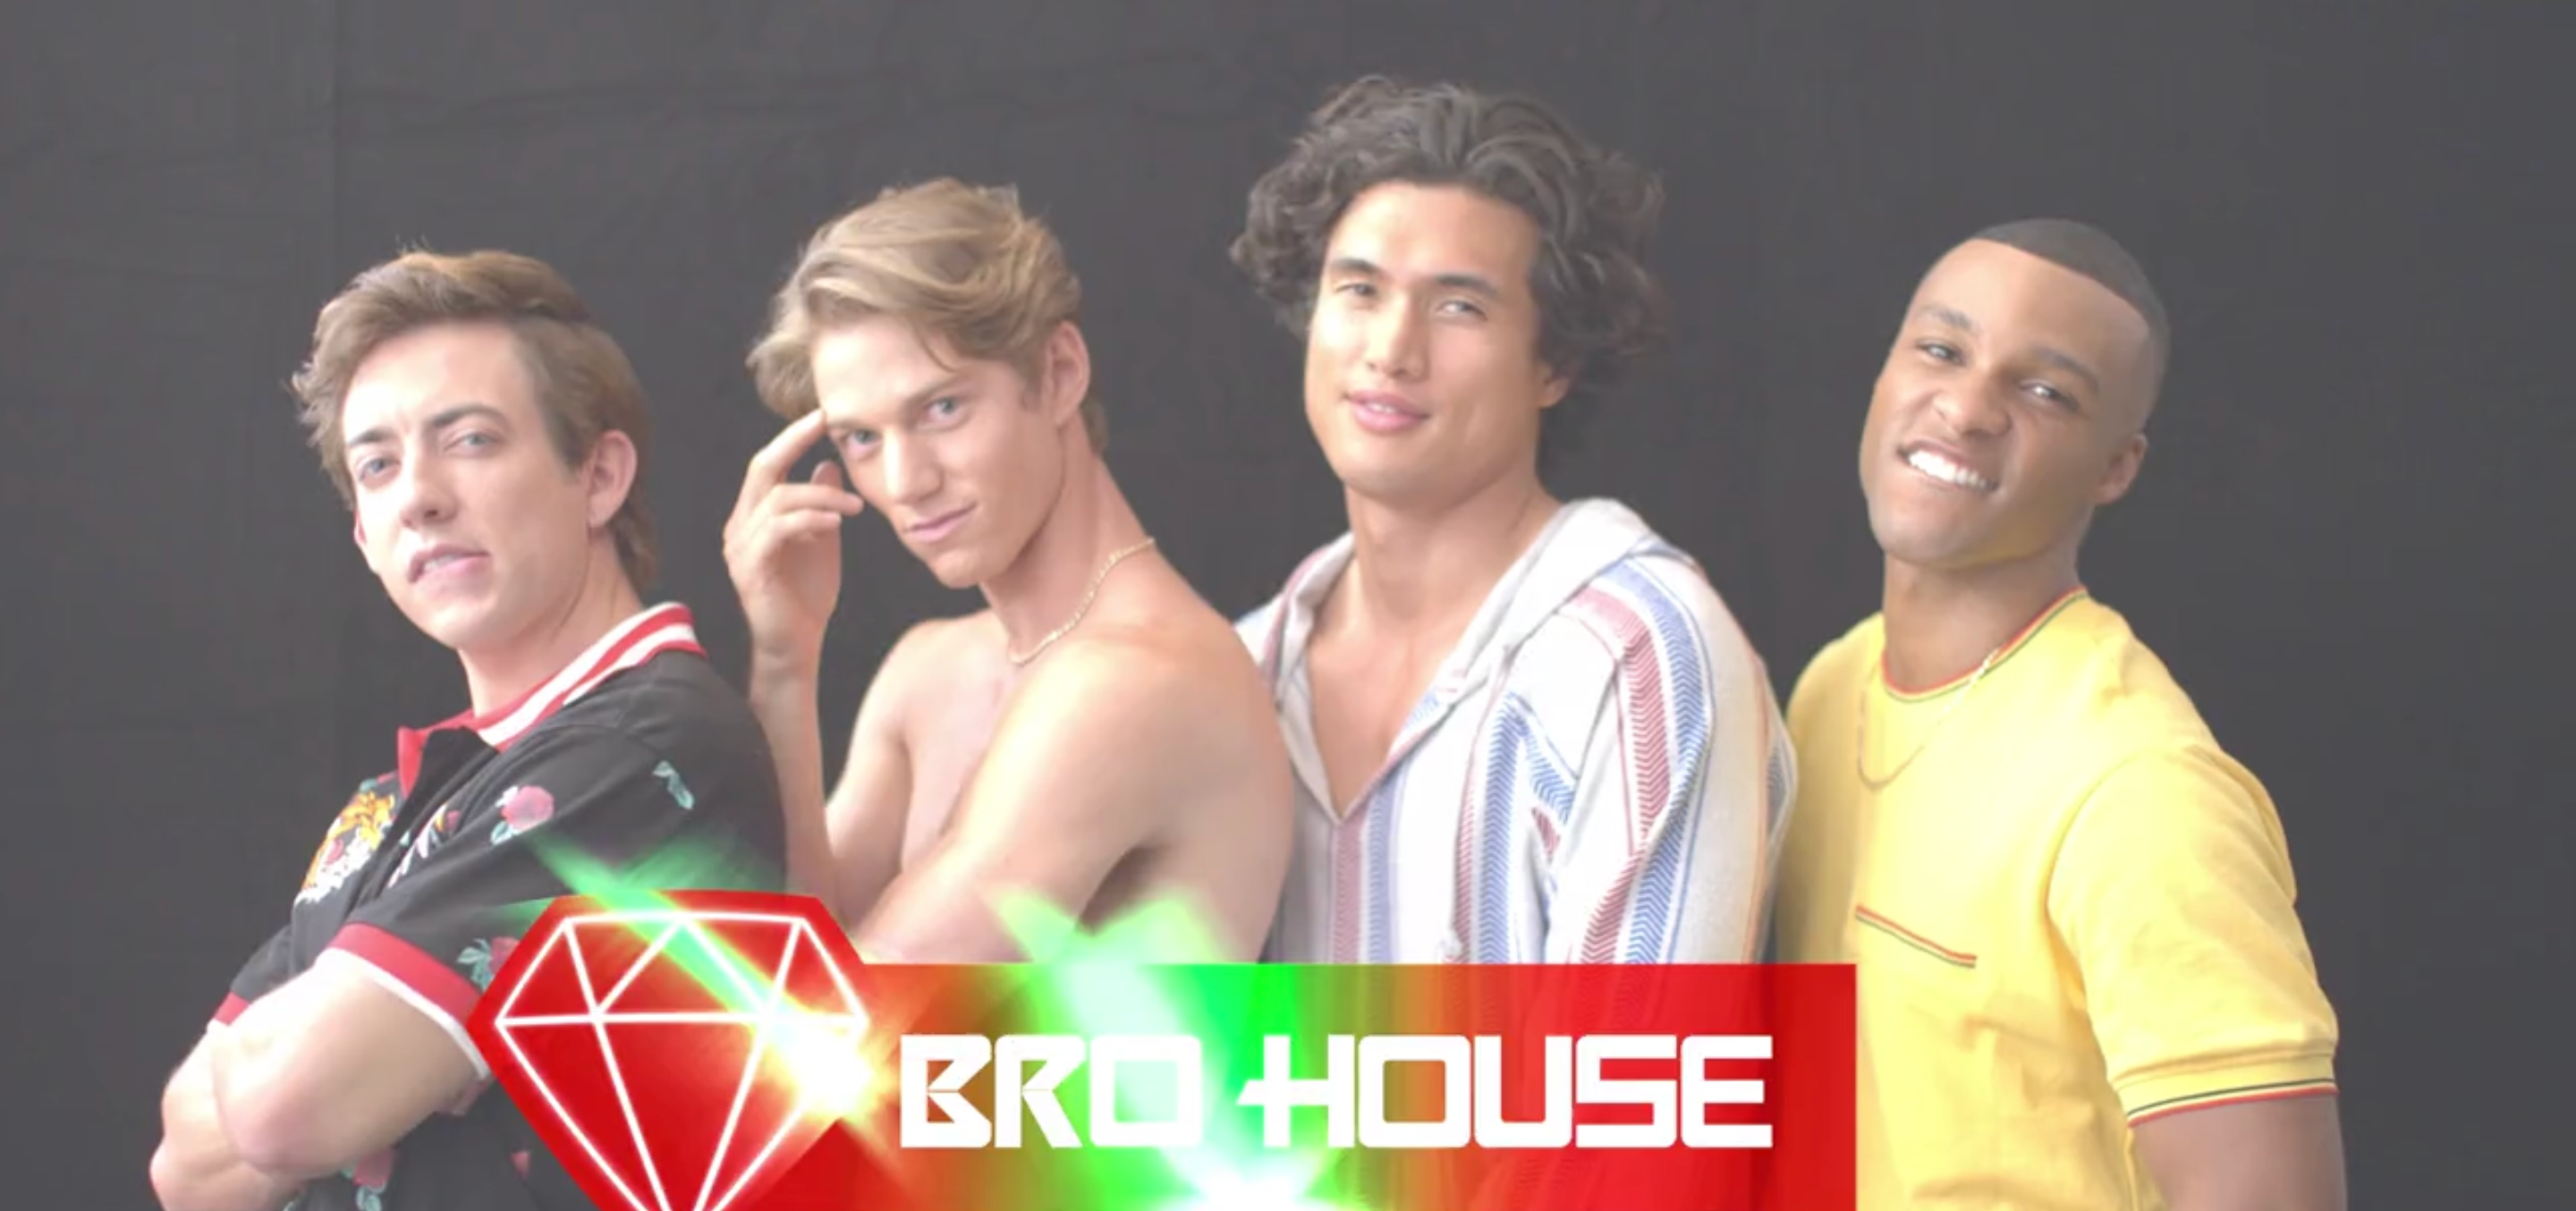 The "Bro House" in 'American Horror Stories'